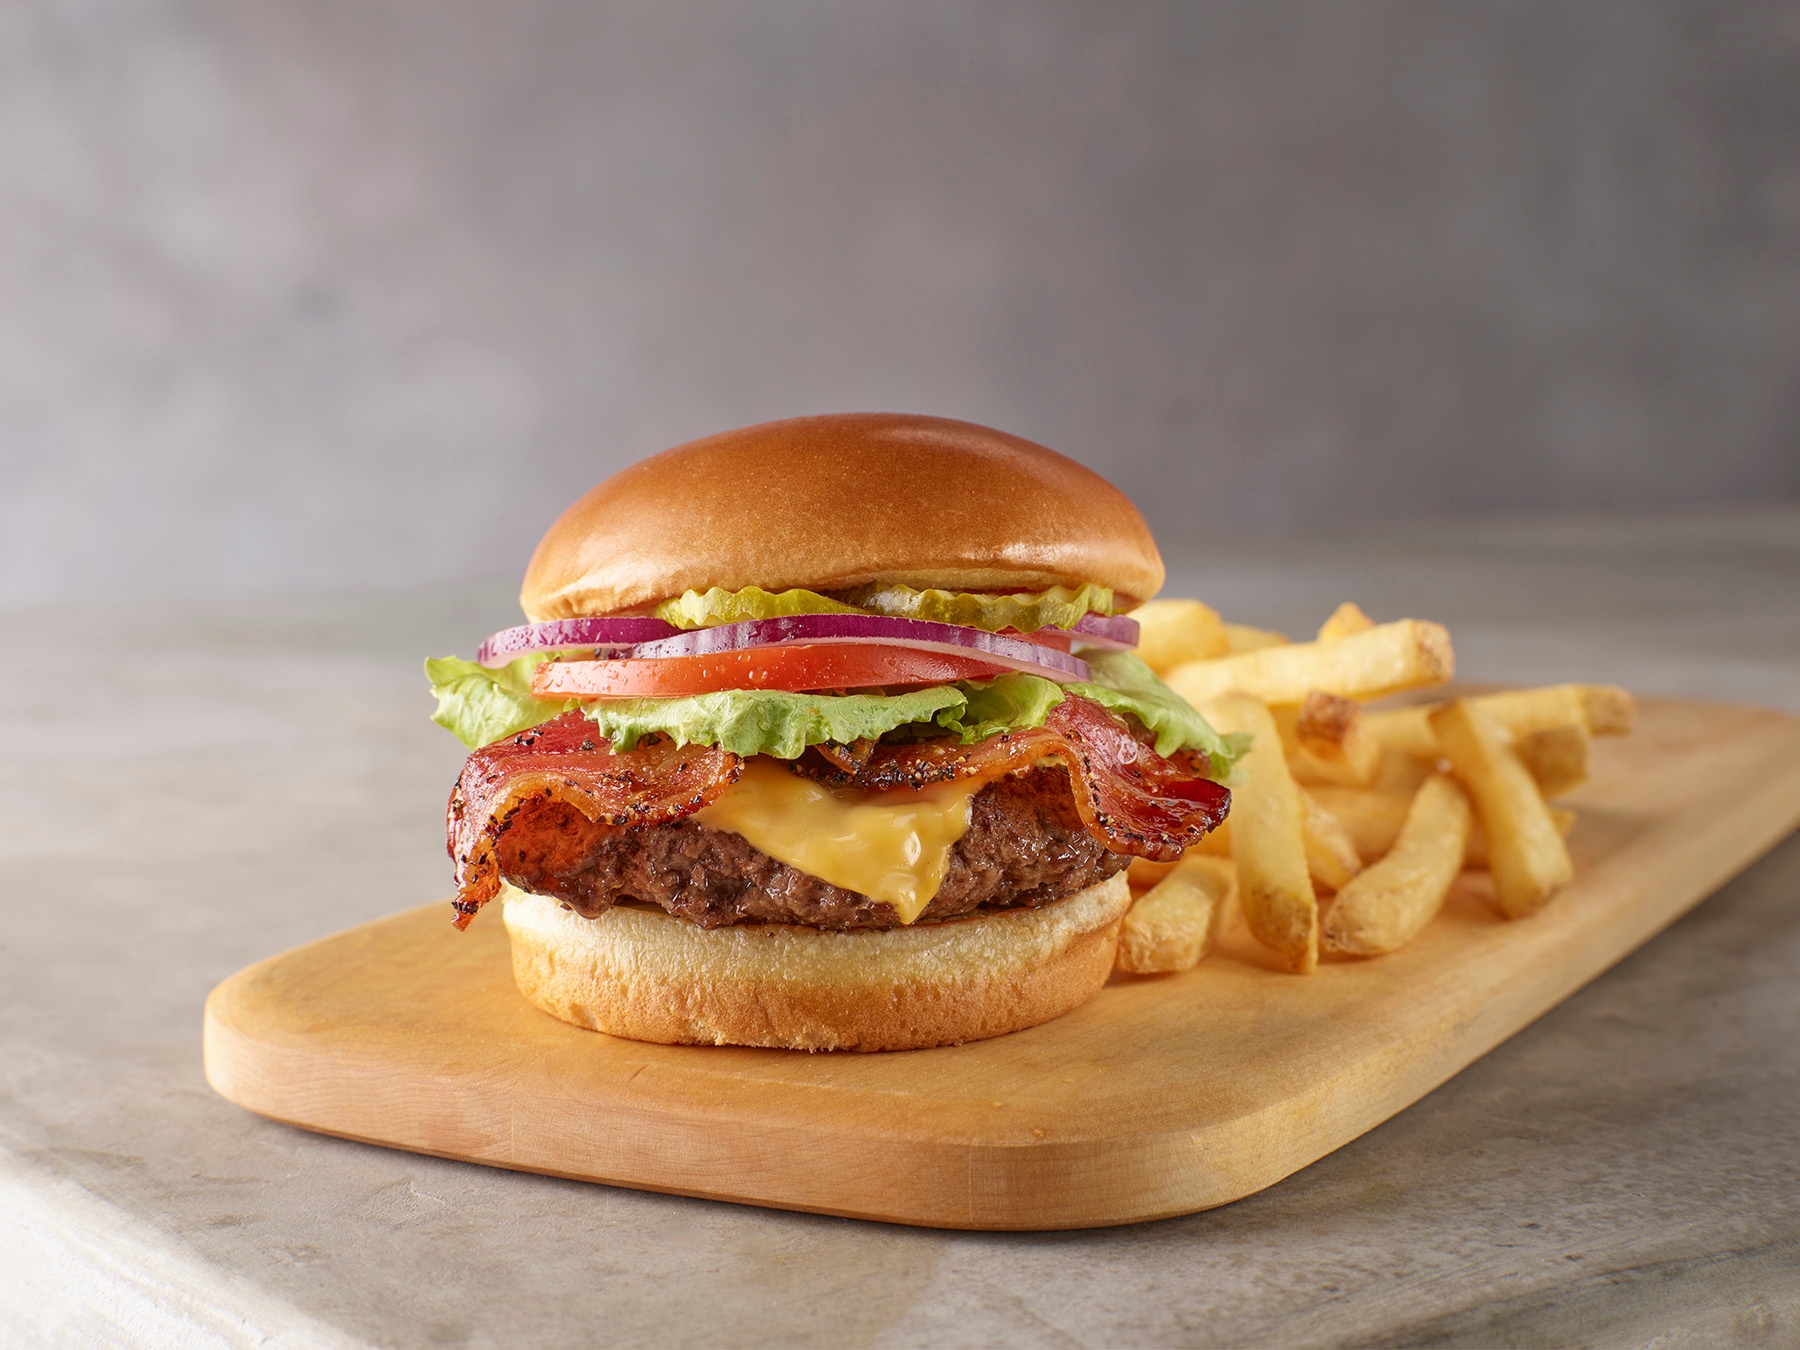 A beef patty topped with bacon, American cheese, lettuce, tomato, red onion, and pickles. Served on a crisp, pillowy bun.